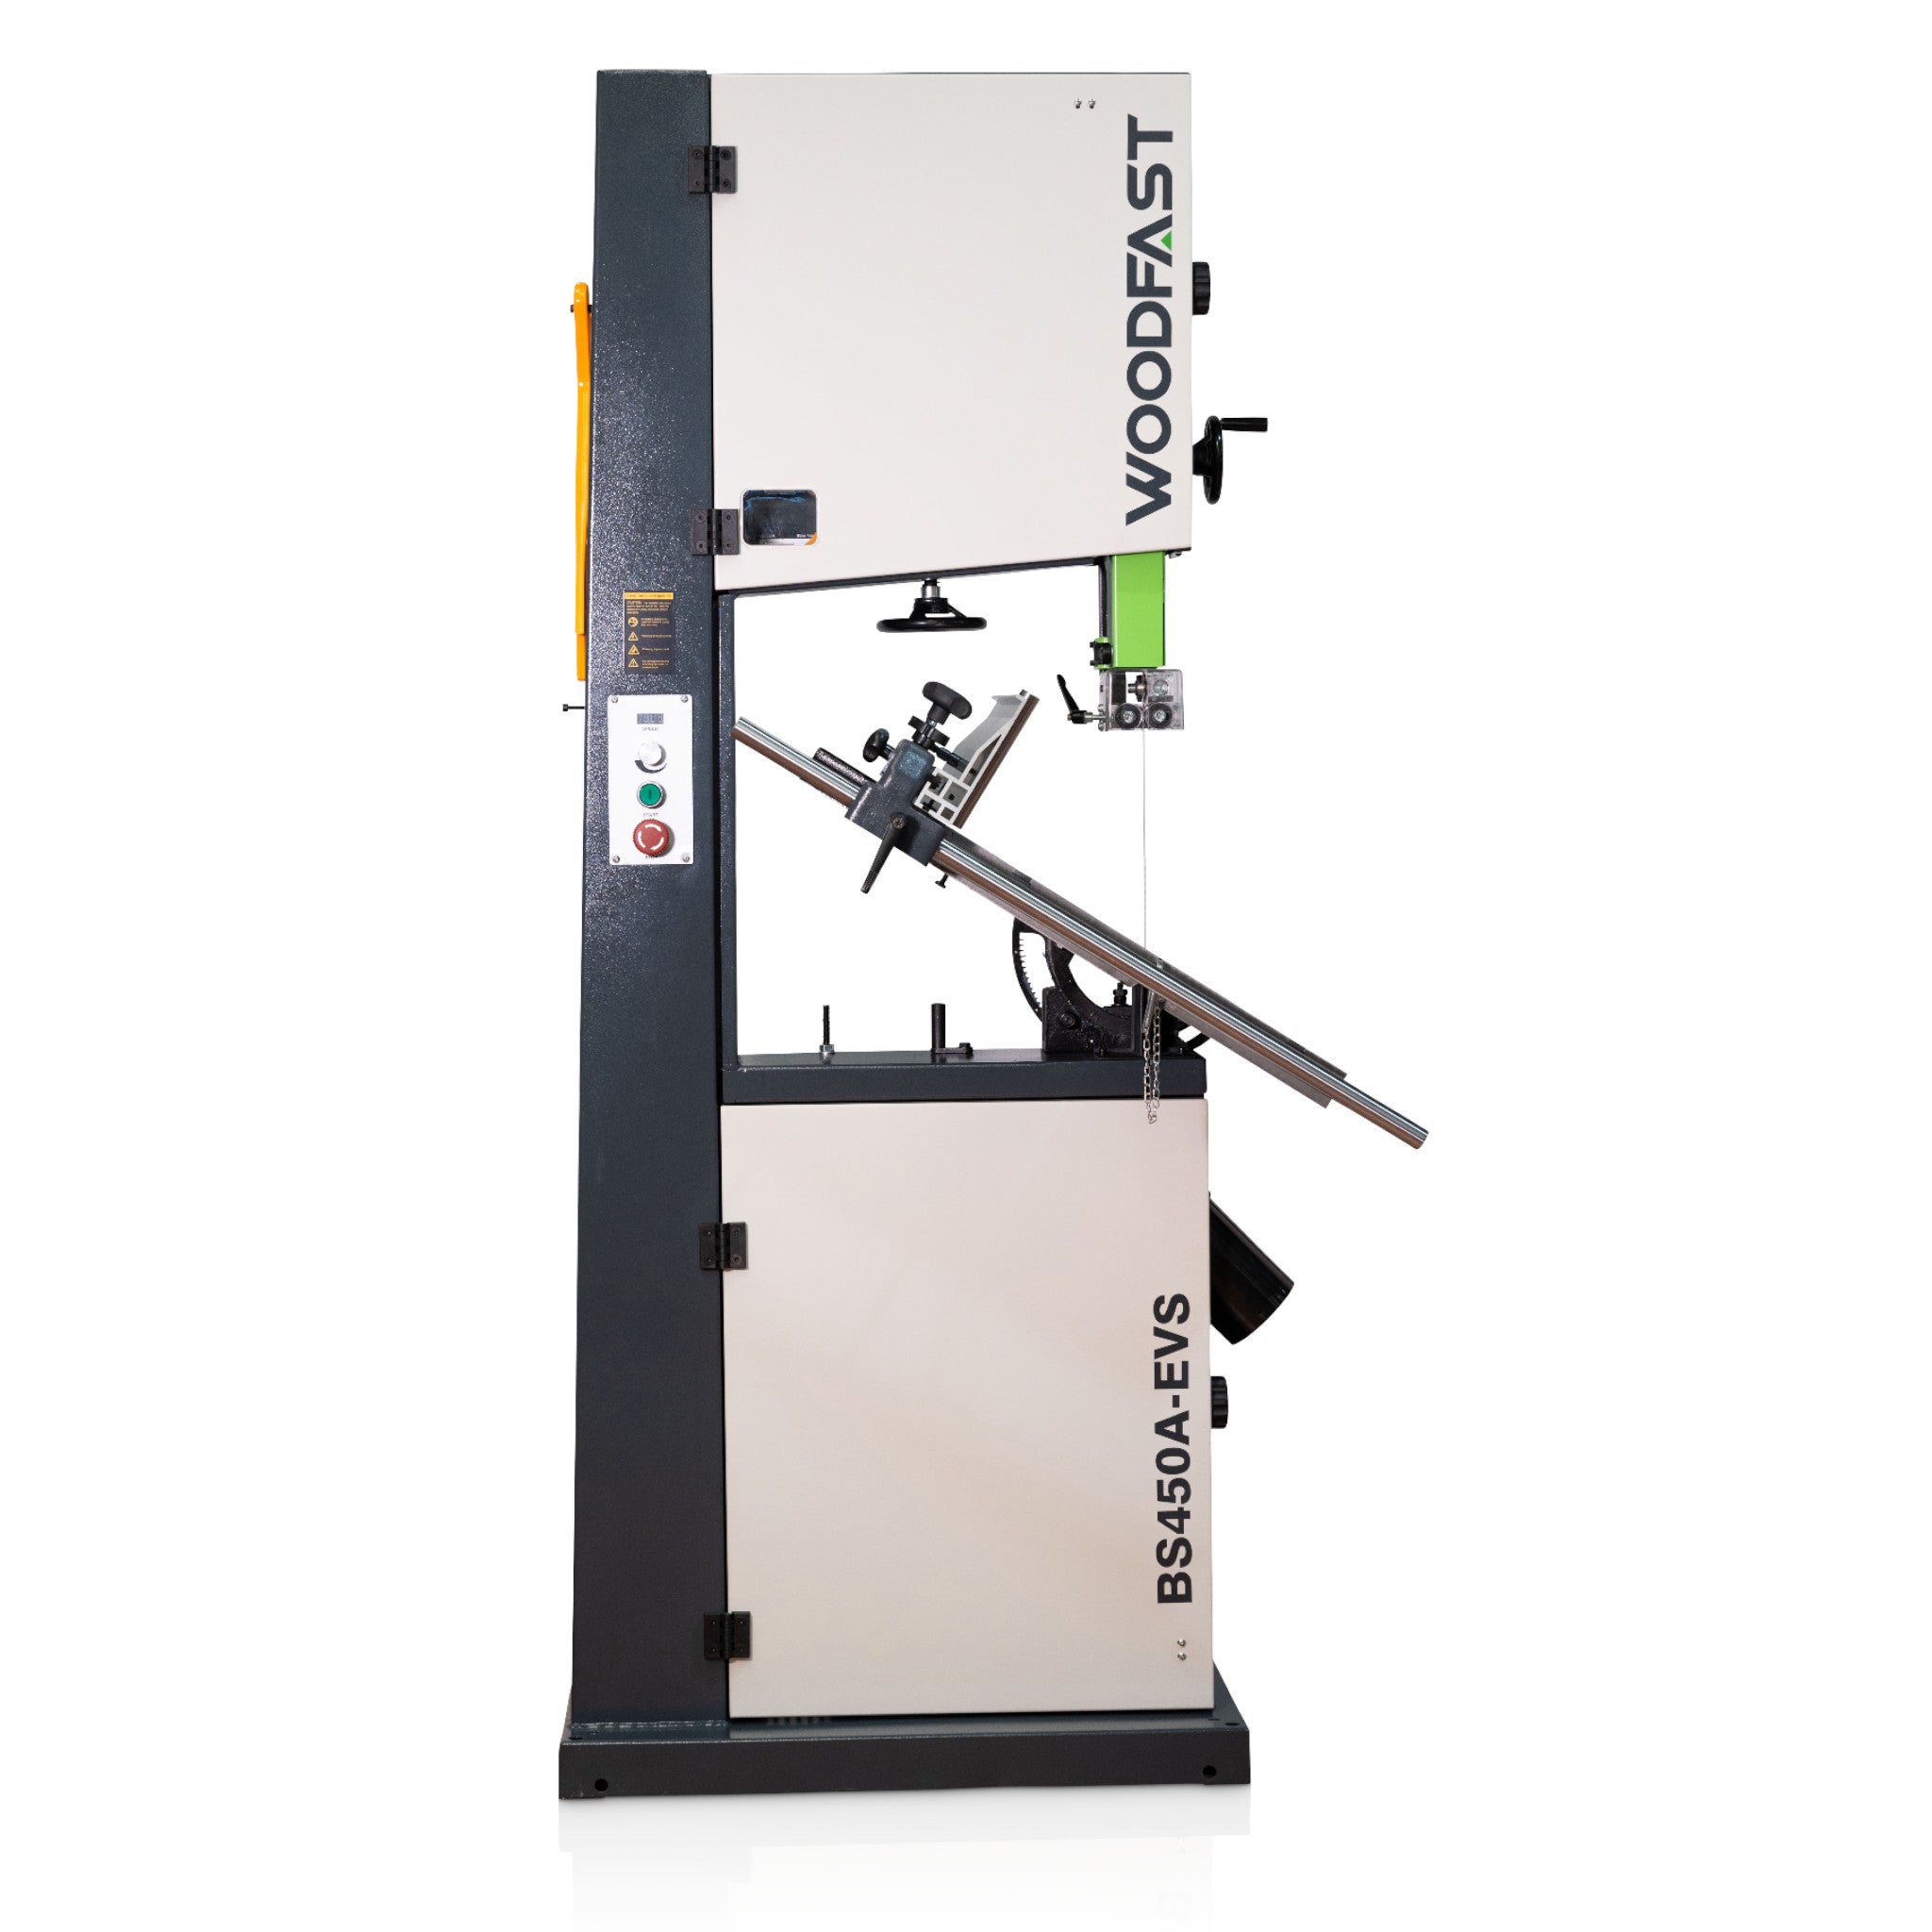 450mm (18") 2.5HP Deluxe Wood / Metal Bandsaw with Electronic Variable Speed BS450A-EVS by Woodfast *New Arrival*